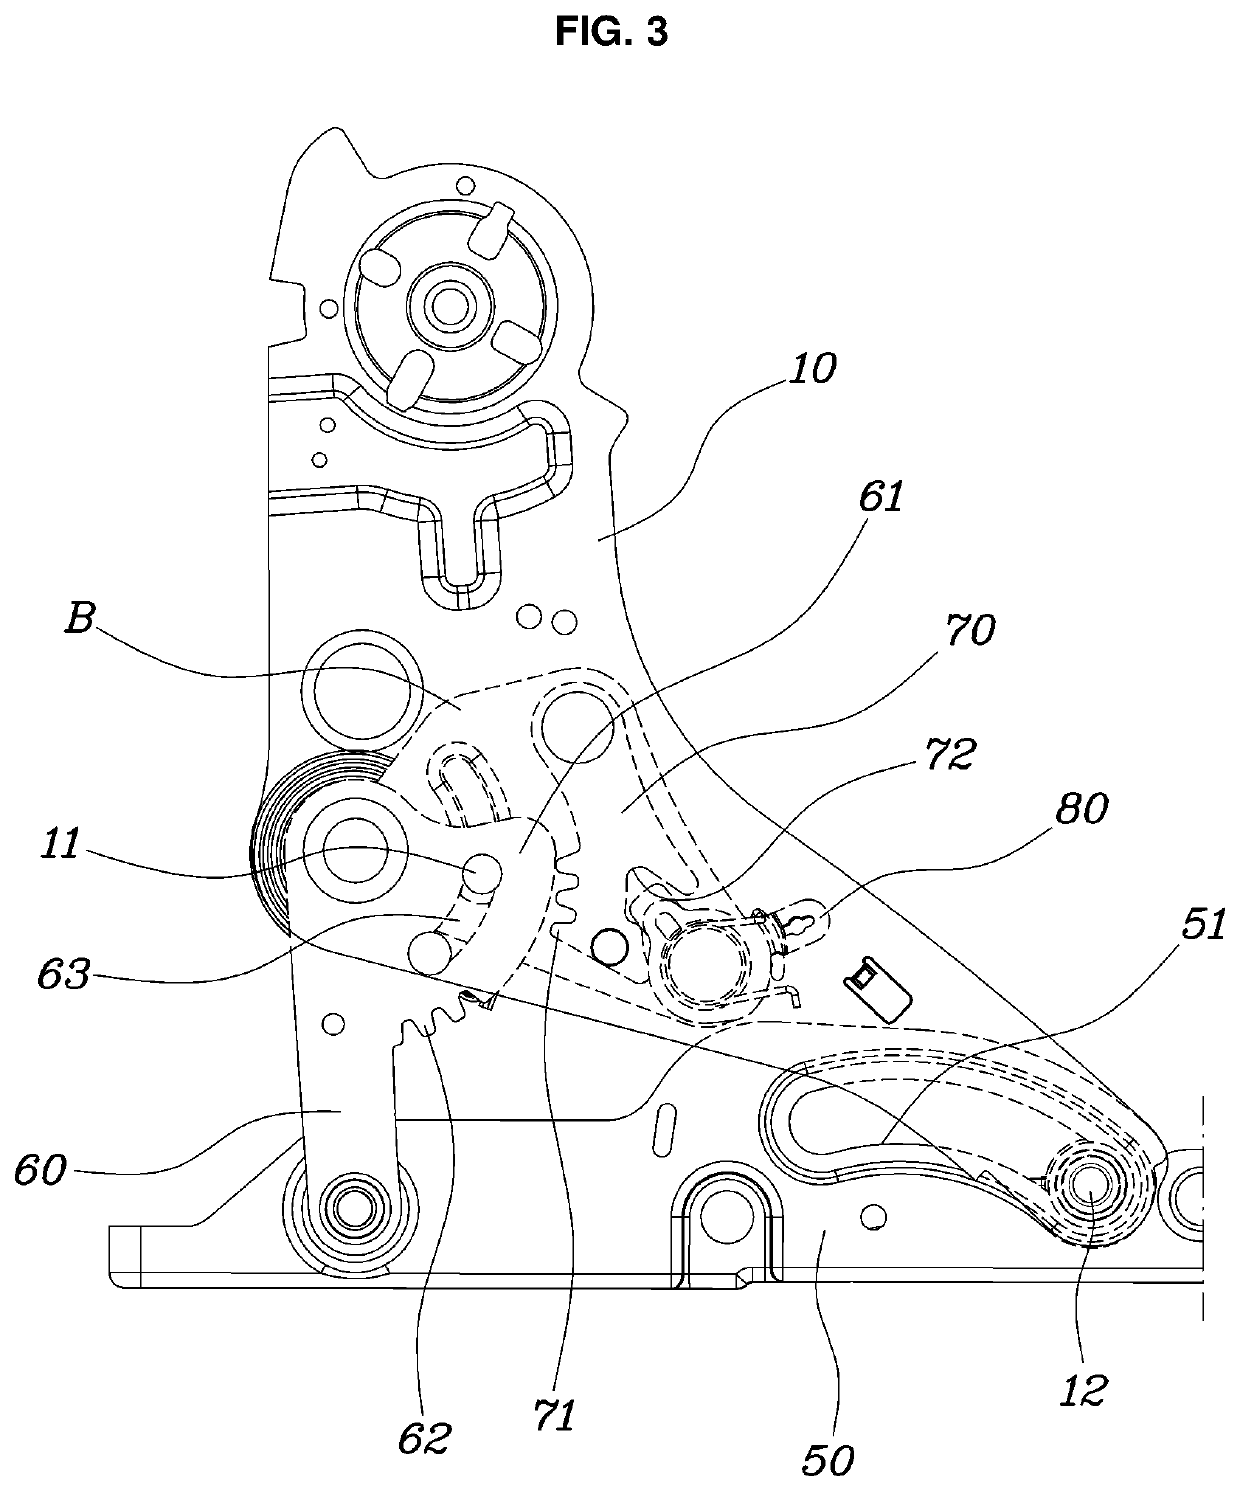 Walk-in apparatus for vehicular seat